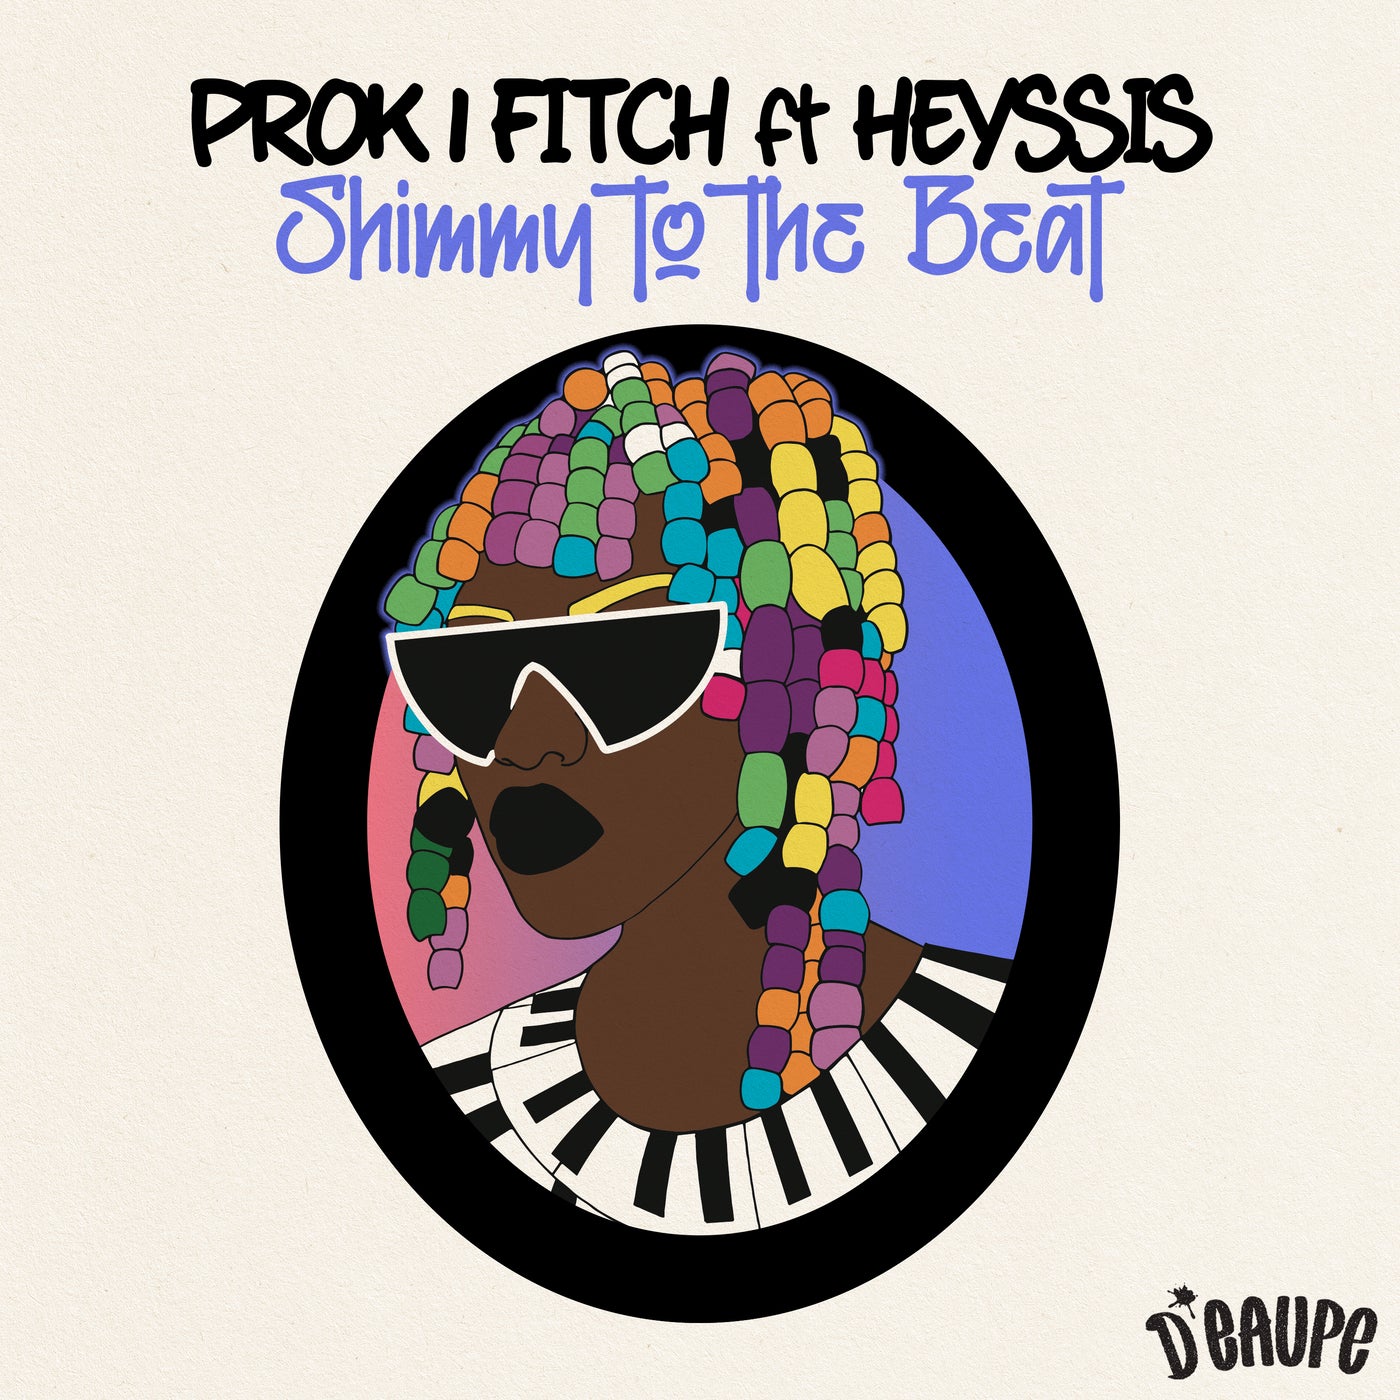 image cover: Prok & Fitch, Heyssis - Shimmy To The Beat on D'EAUPE